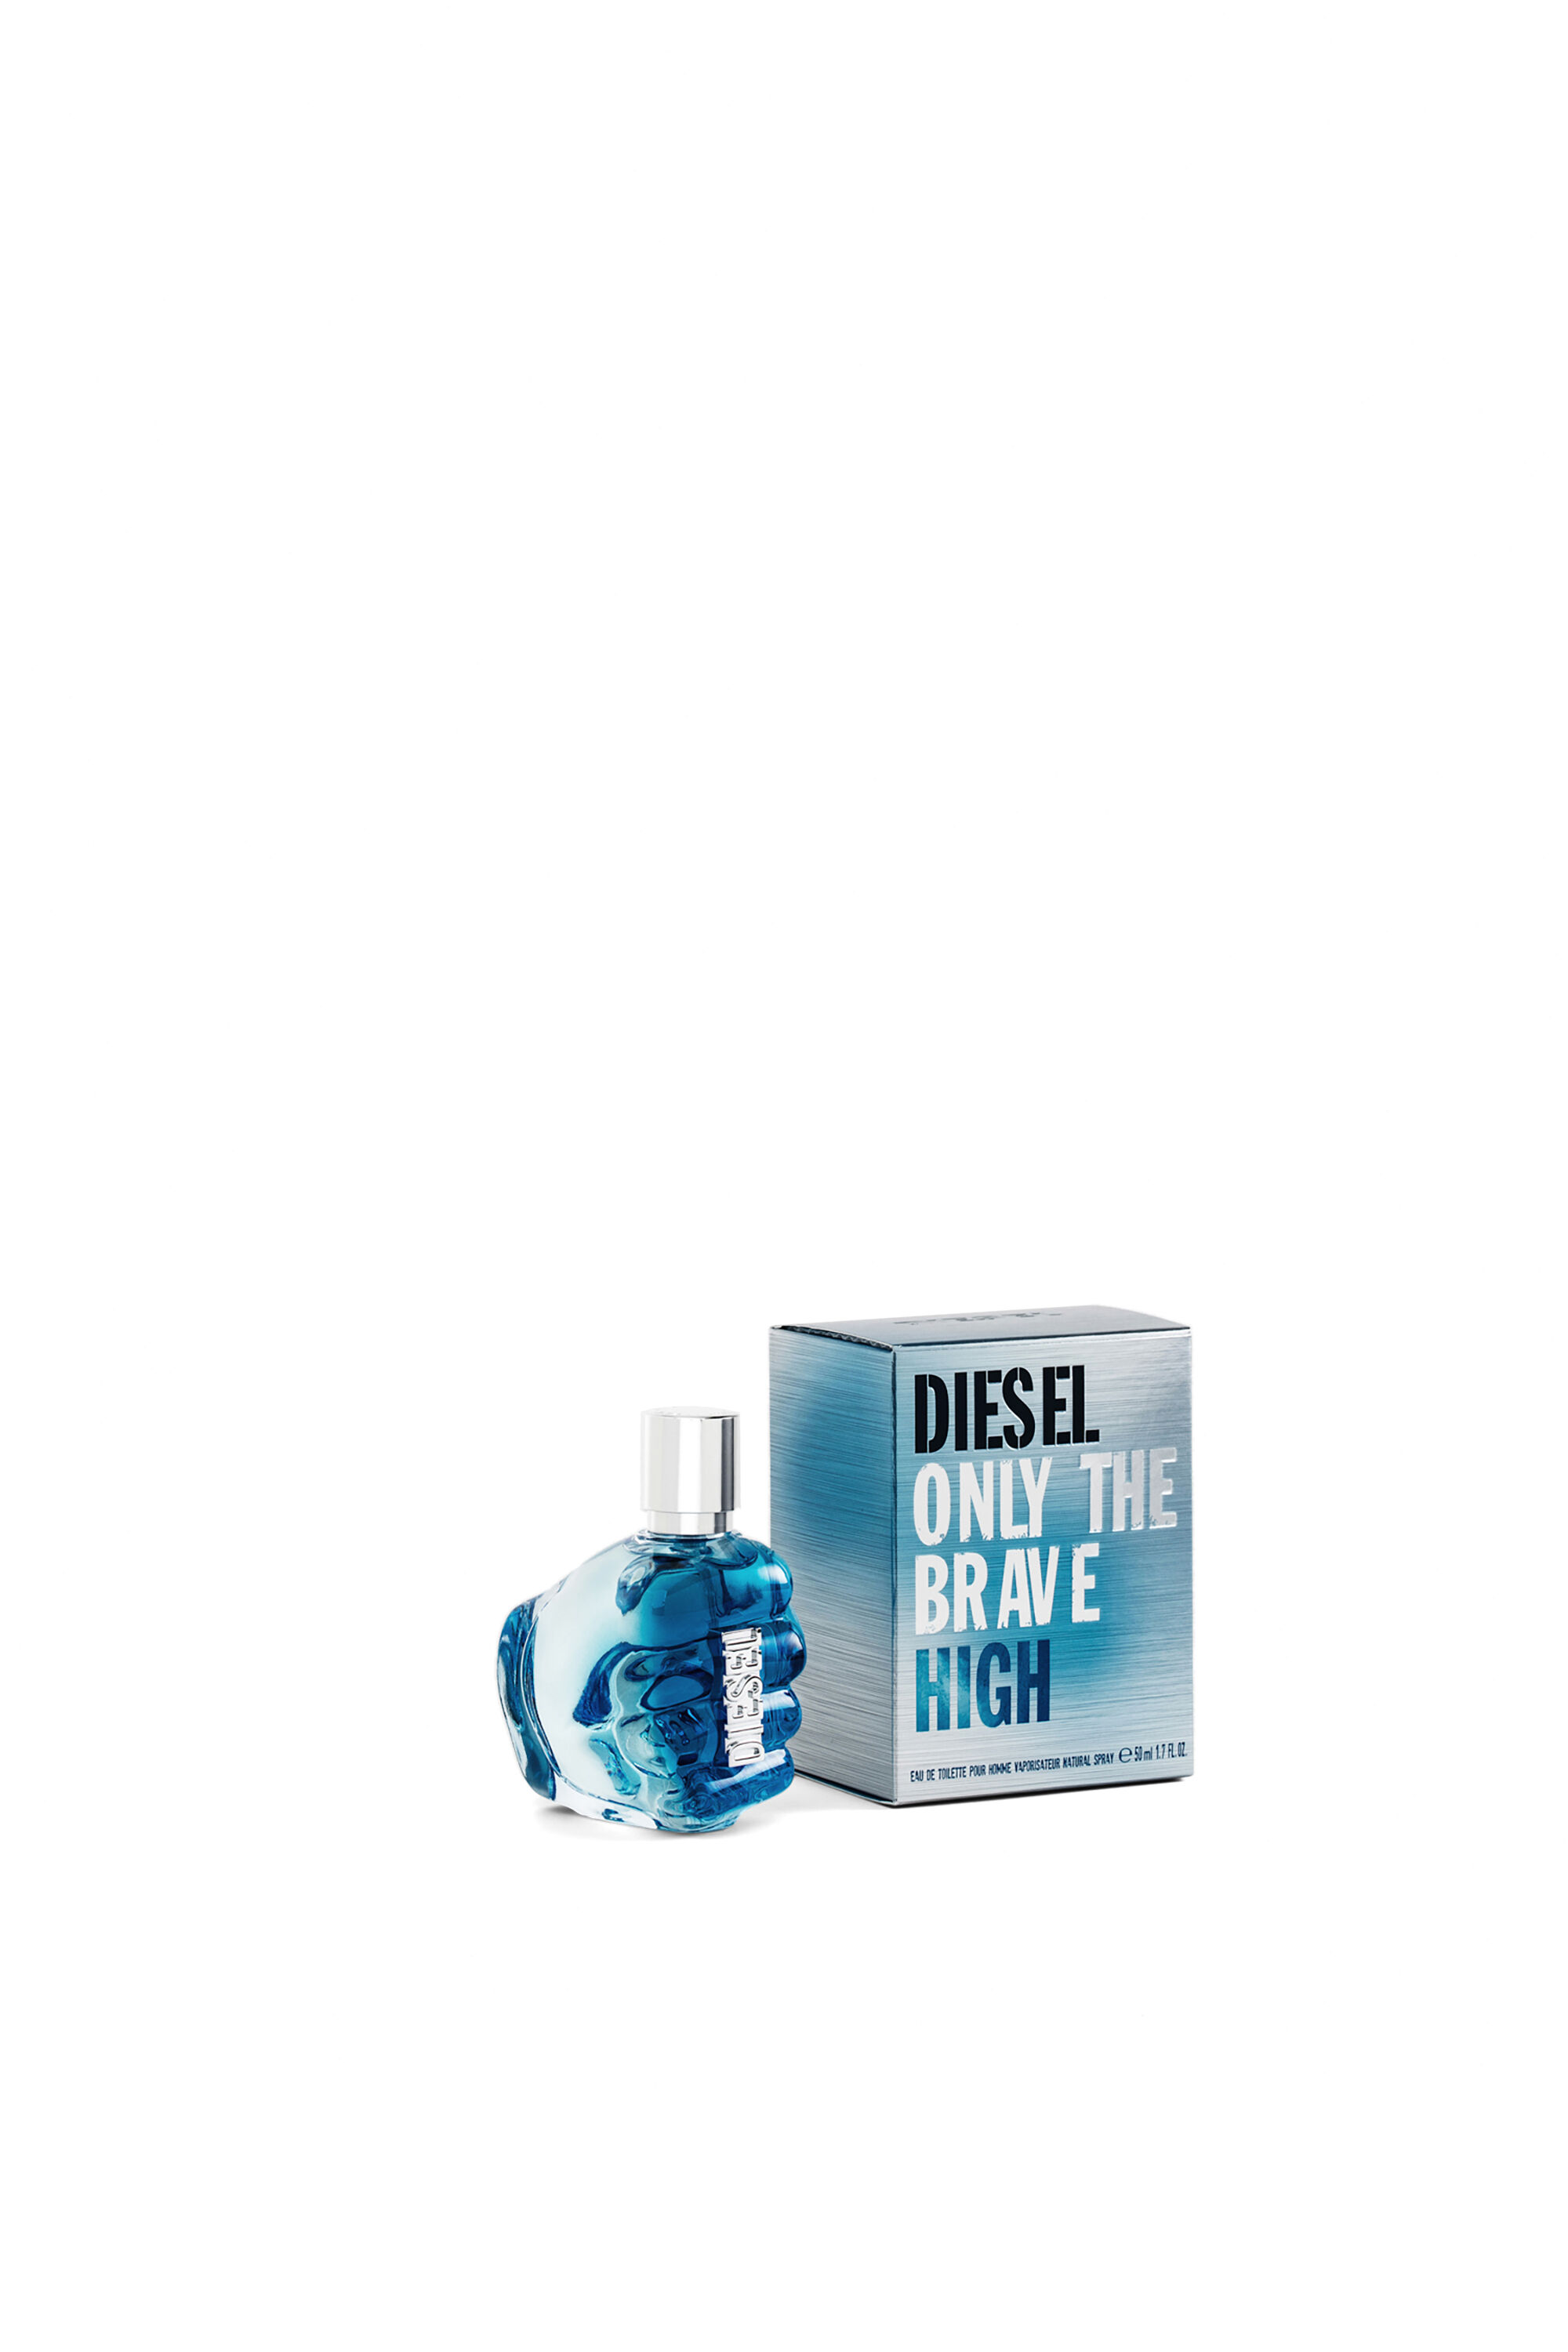 Diesel - ONLY THE BRAVE HIGH  50ML, Azul Claro - Image 1